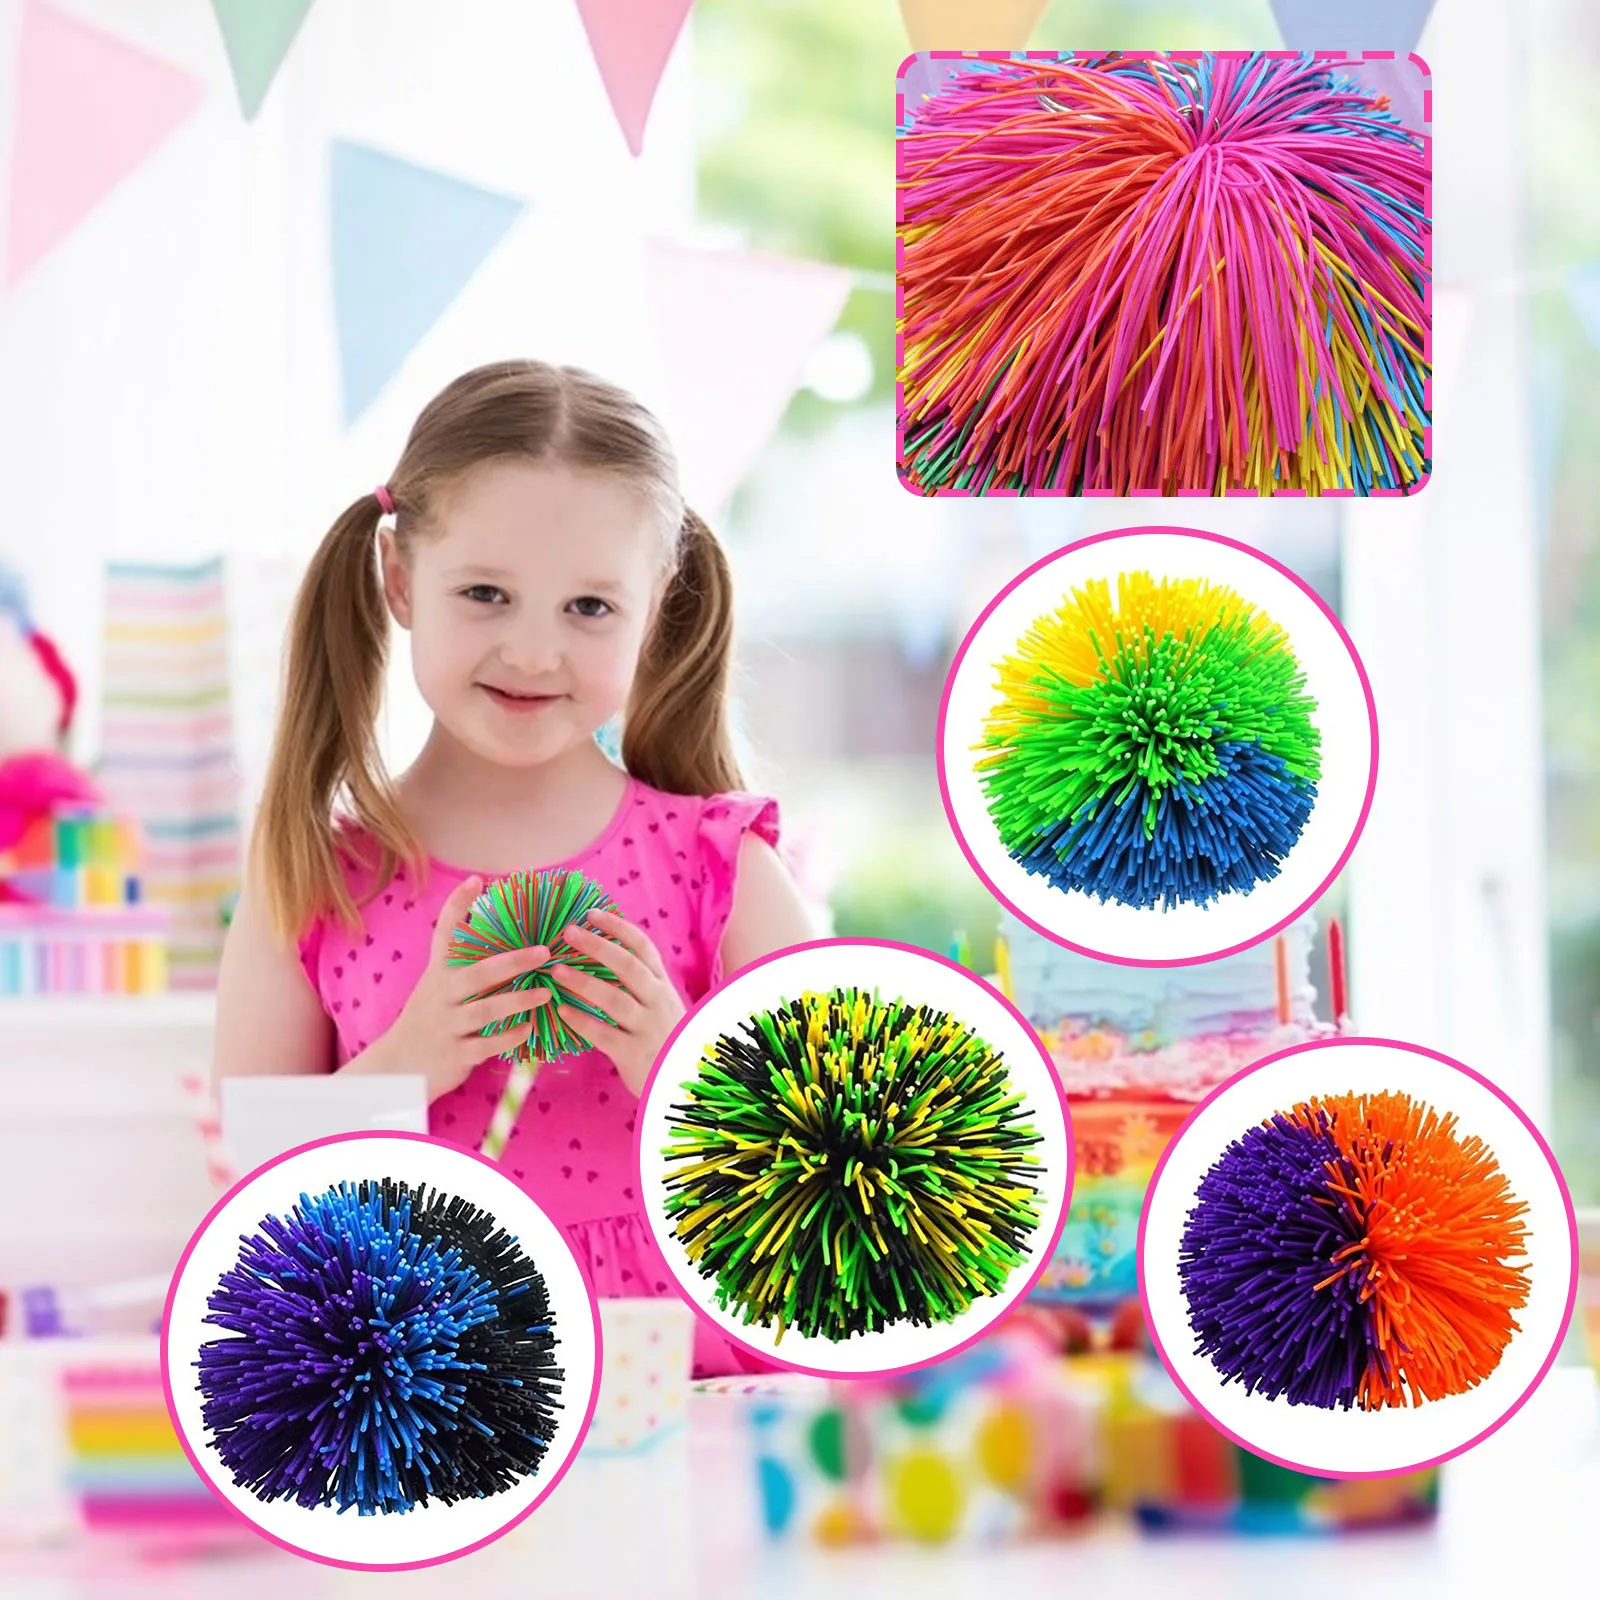 

6cm Large Colorful Silicone Koosh Ball Stringy Ball Bouncing Fluffy Jugging Ball Sensory Fidgets Stress Relief Toys FE